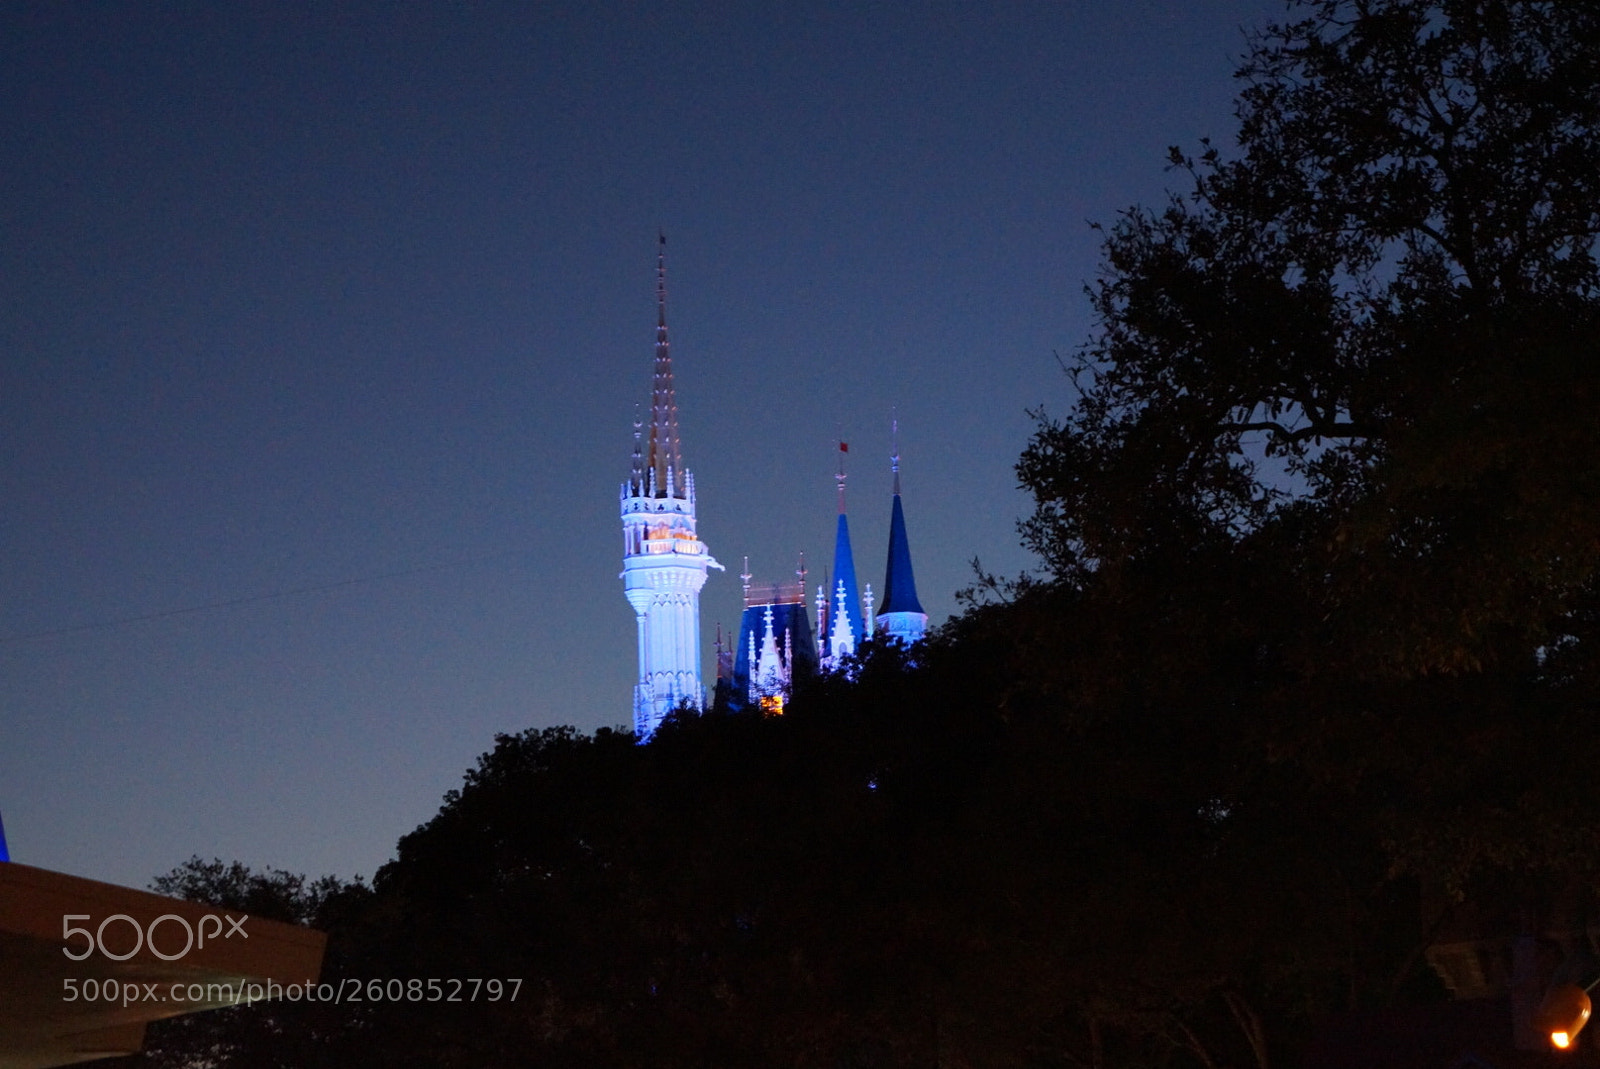 Sony SLT-A58 sample photo. Cinderella castle at night photography